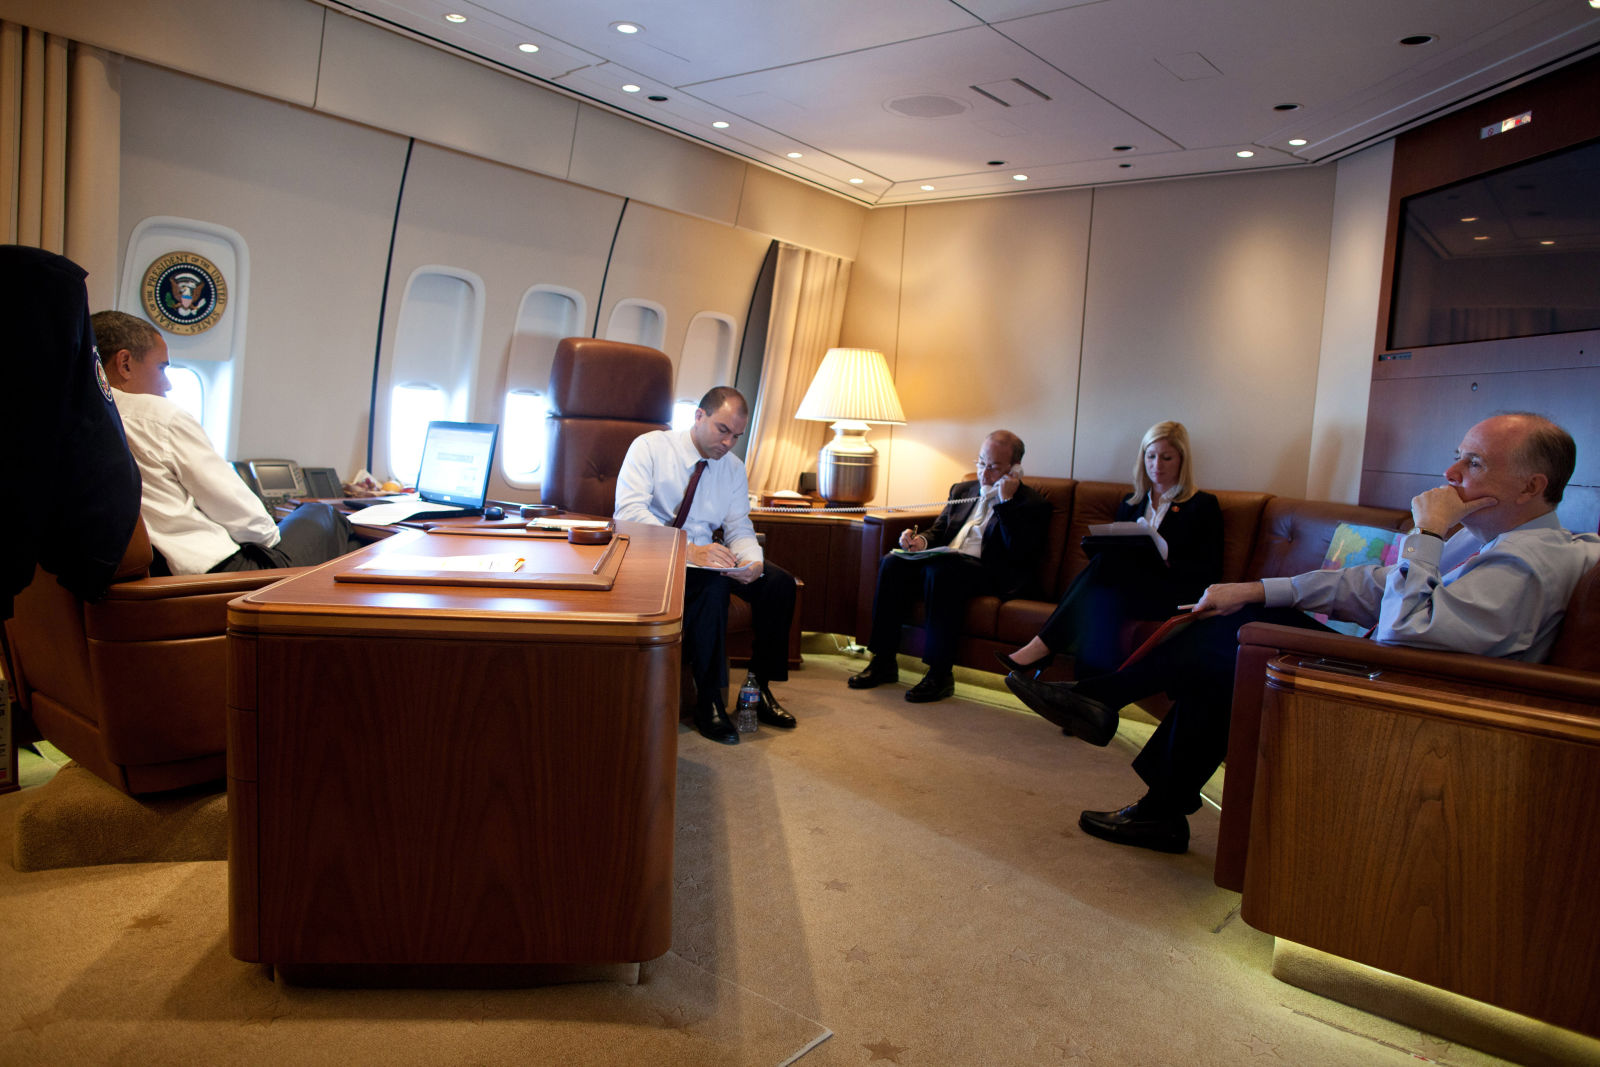 President Obama holds a meeting in the airborne Oval Office in 2011